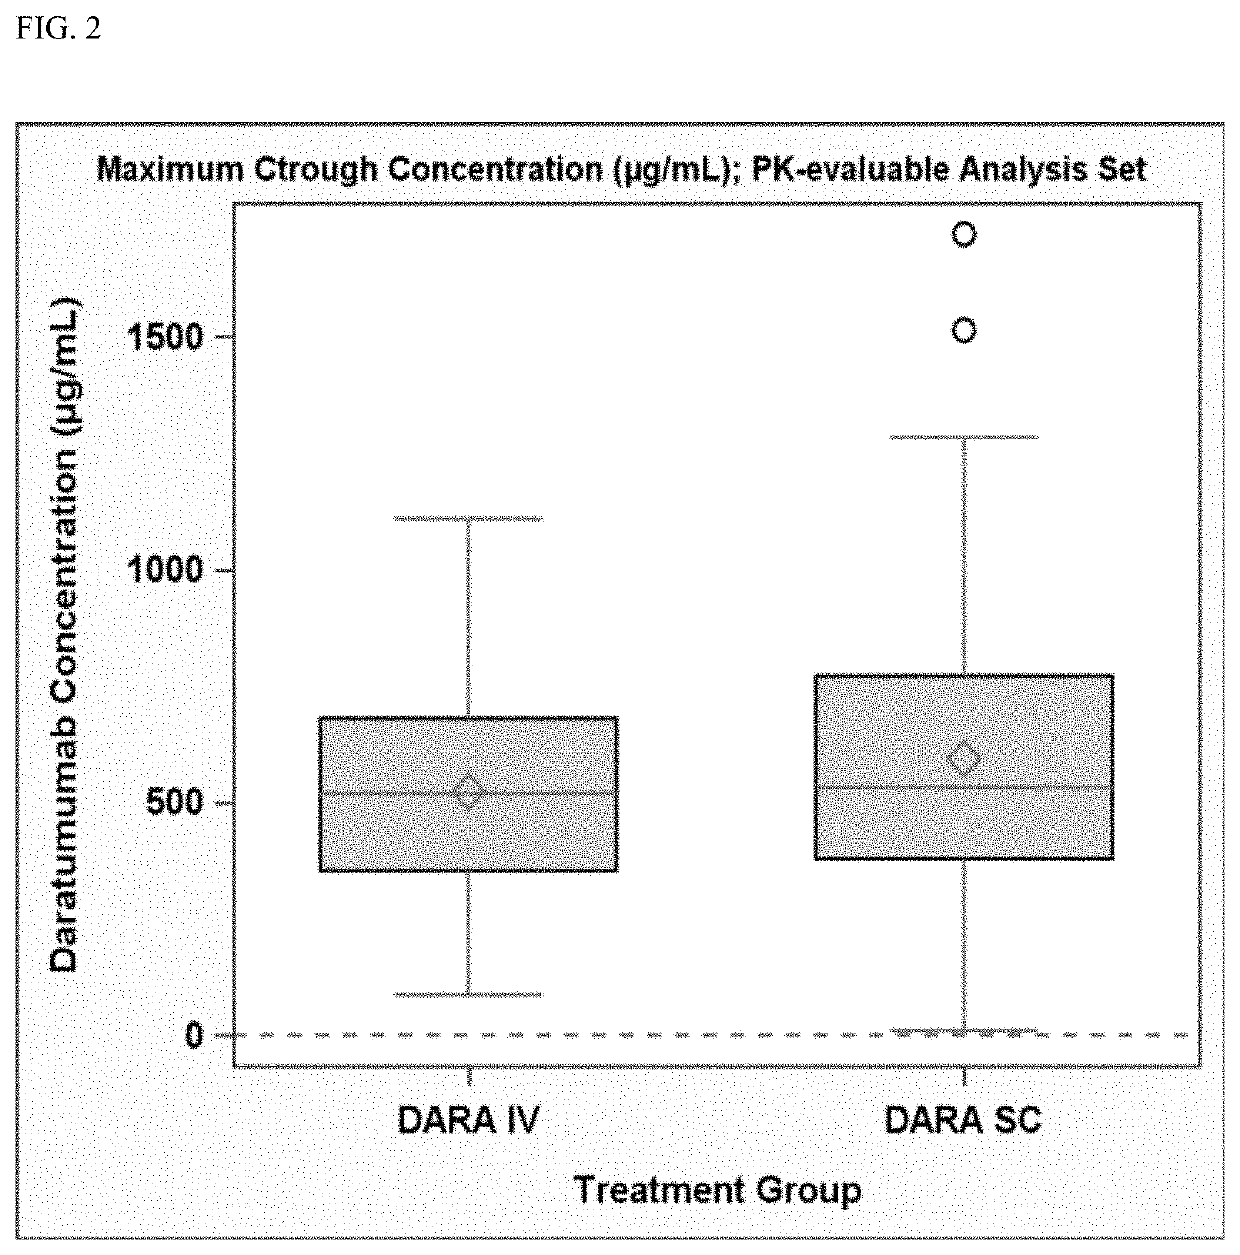 Clinically Proven Subcutaneous Pharmaceutical Compositions Comprising Anti-CD38 Antibodies and Their Uses in Combination with Bortezomib, Mephalan and Prednisone